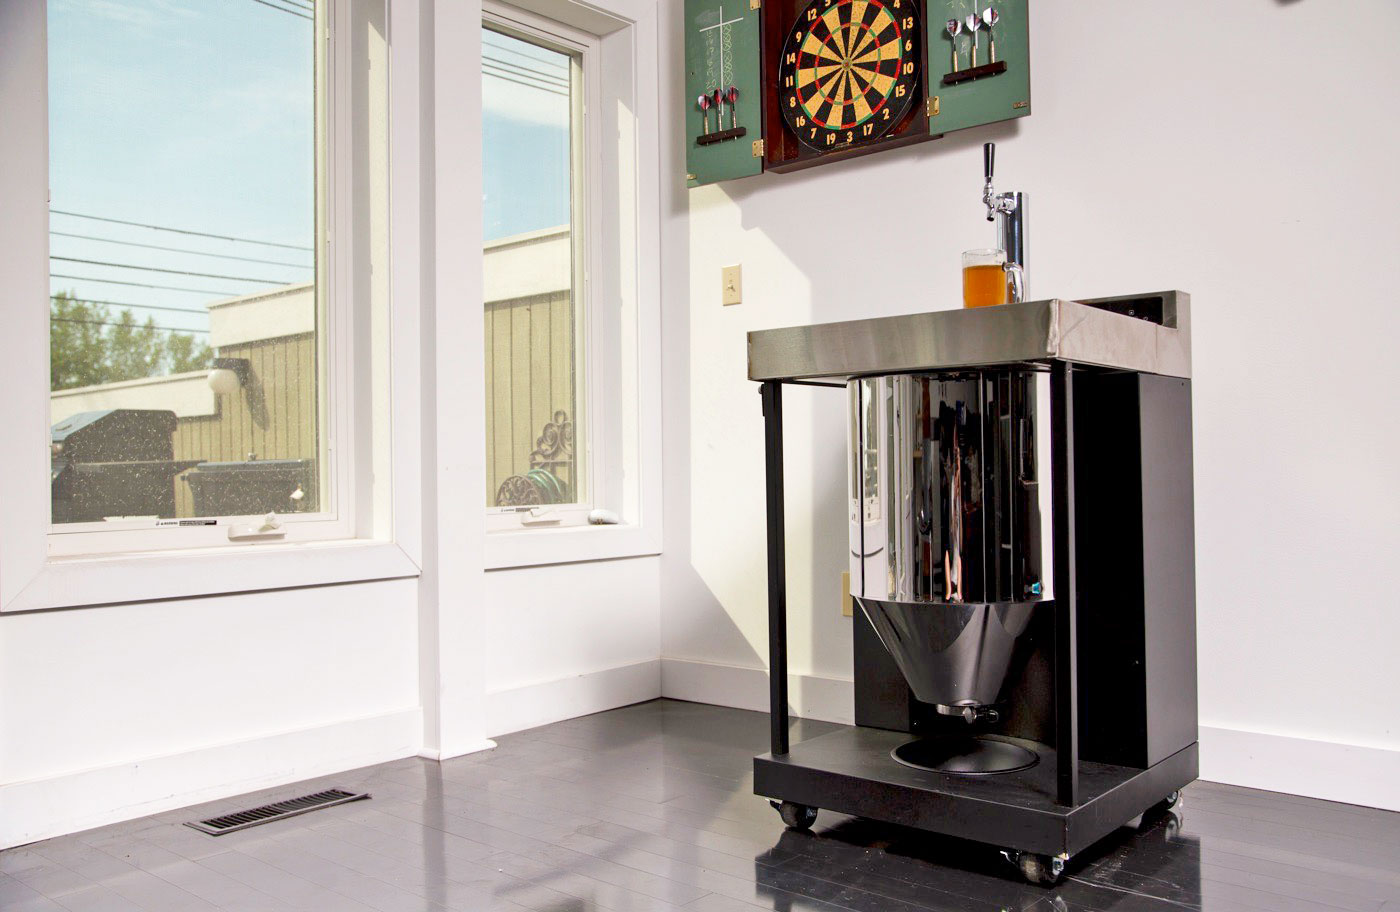 Whirlpool's Vessi is a homebrew fermentor that pours a pint